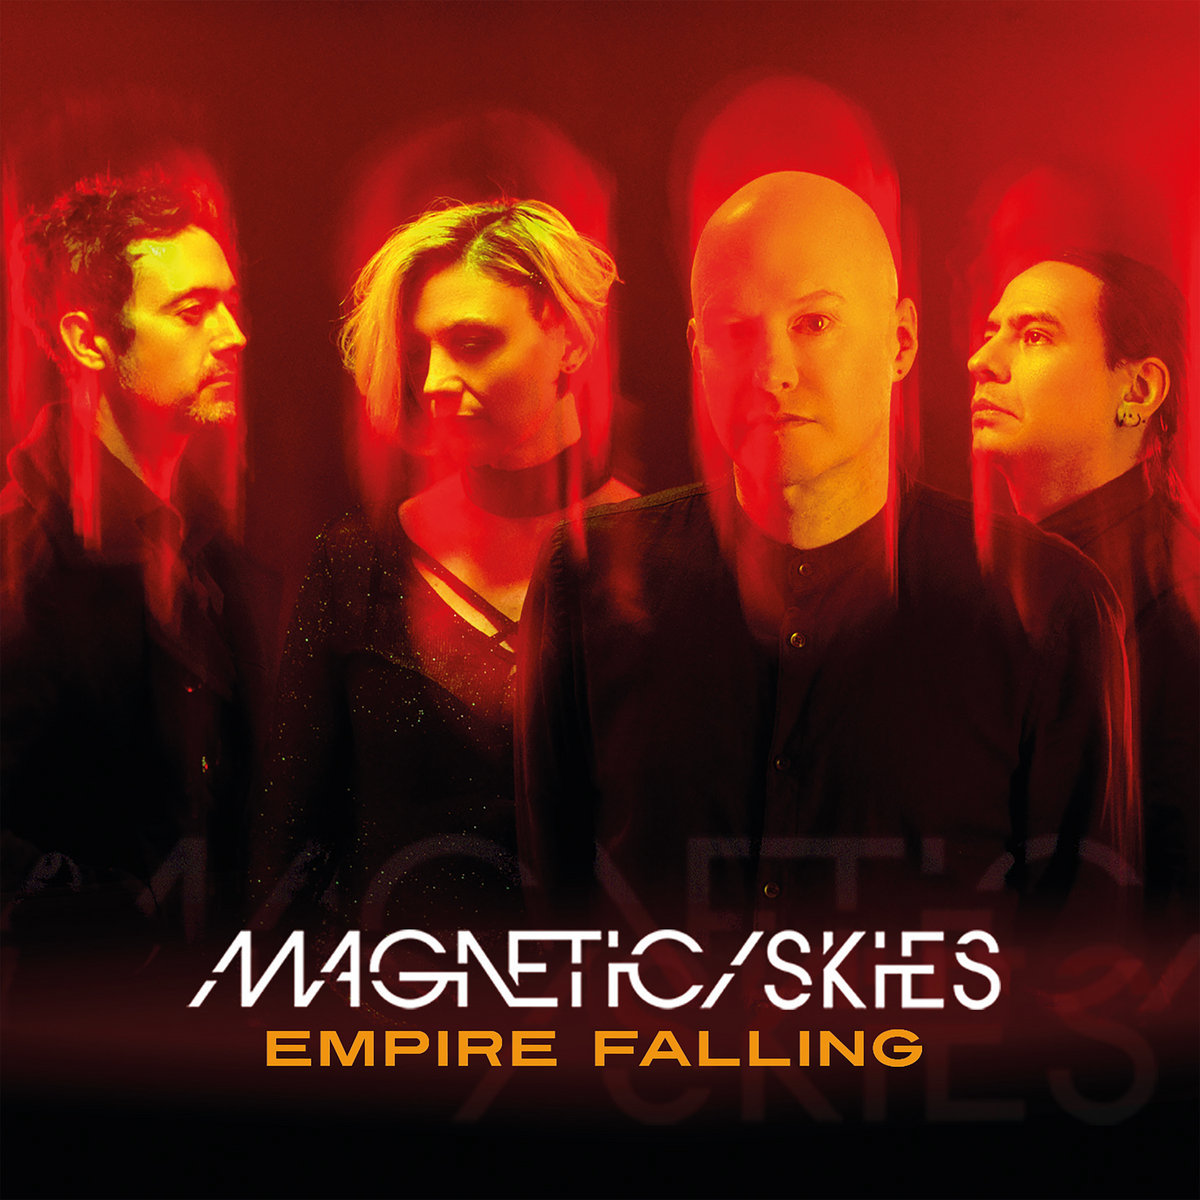 DEBUT ALBUM REVIEW: Empire Falling by Magnetic Skies